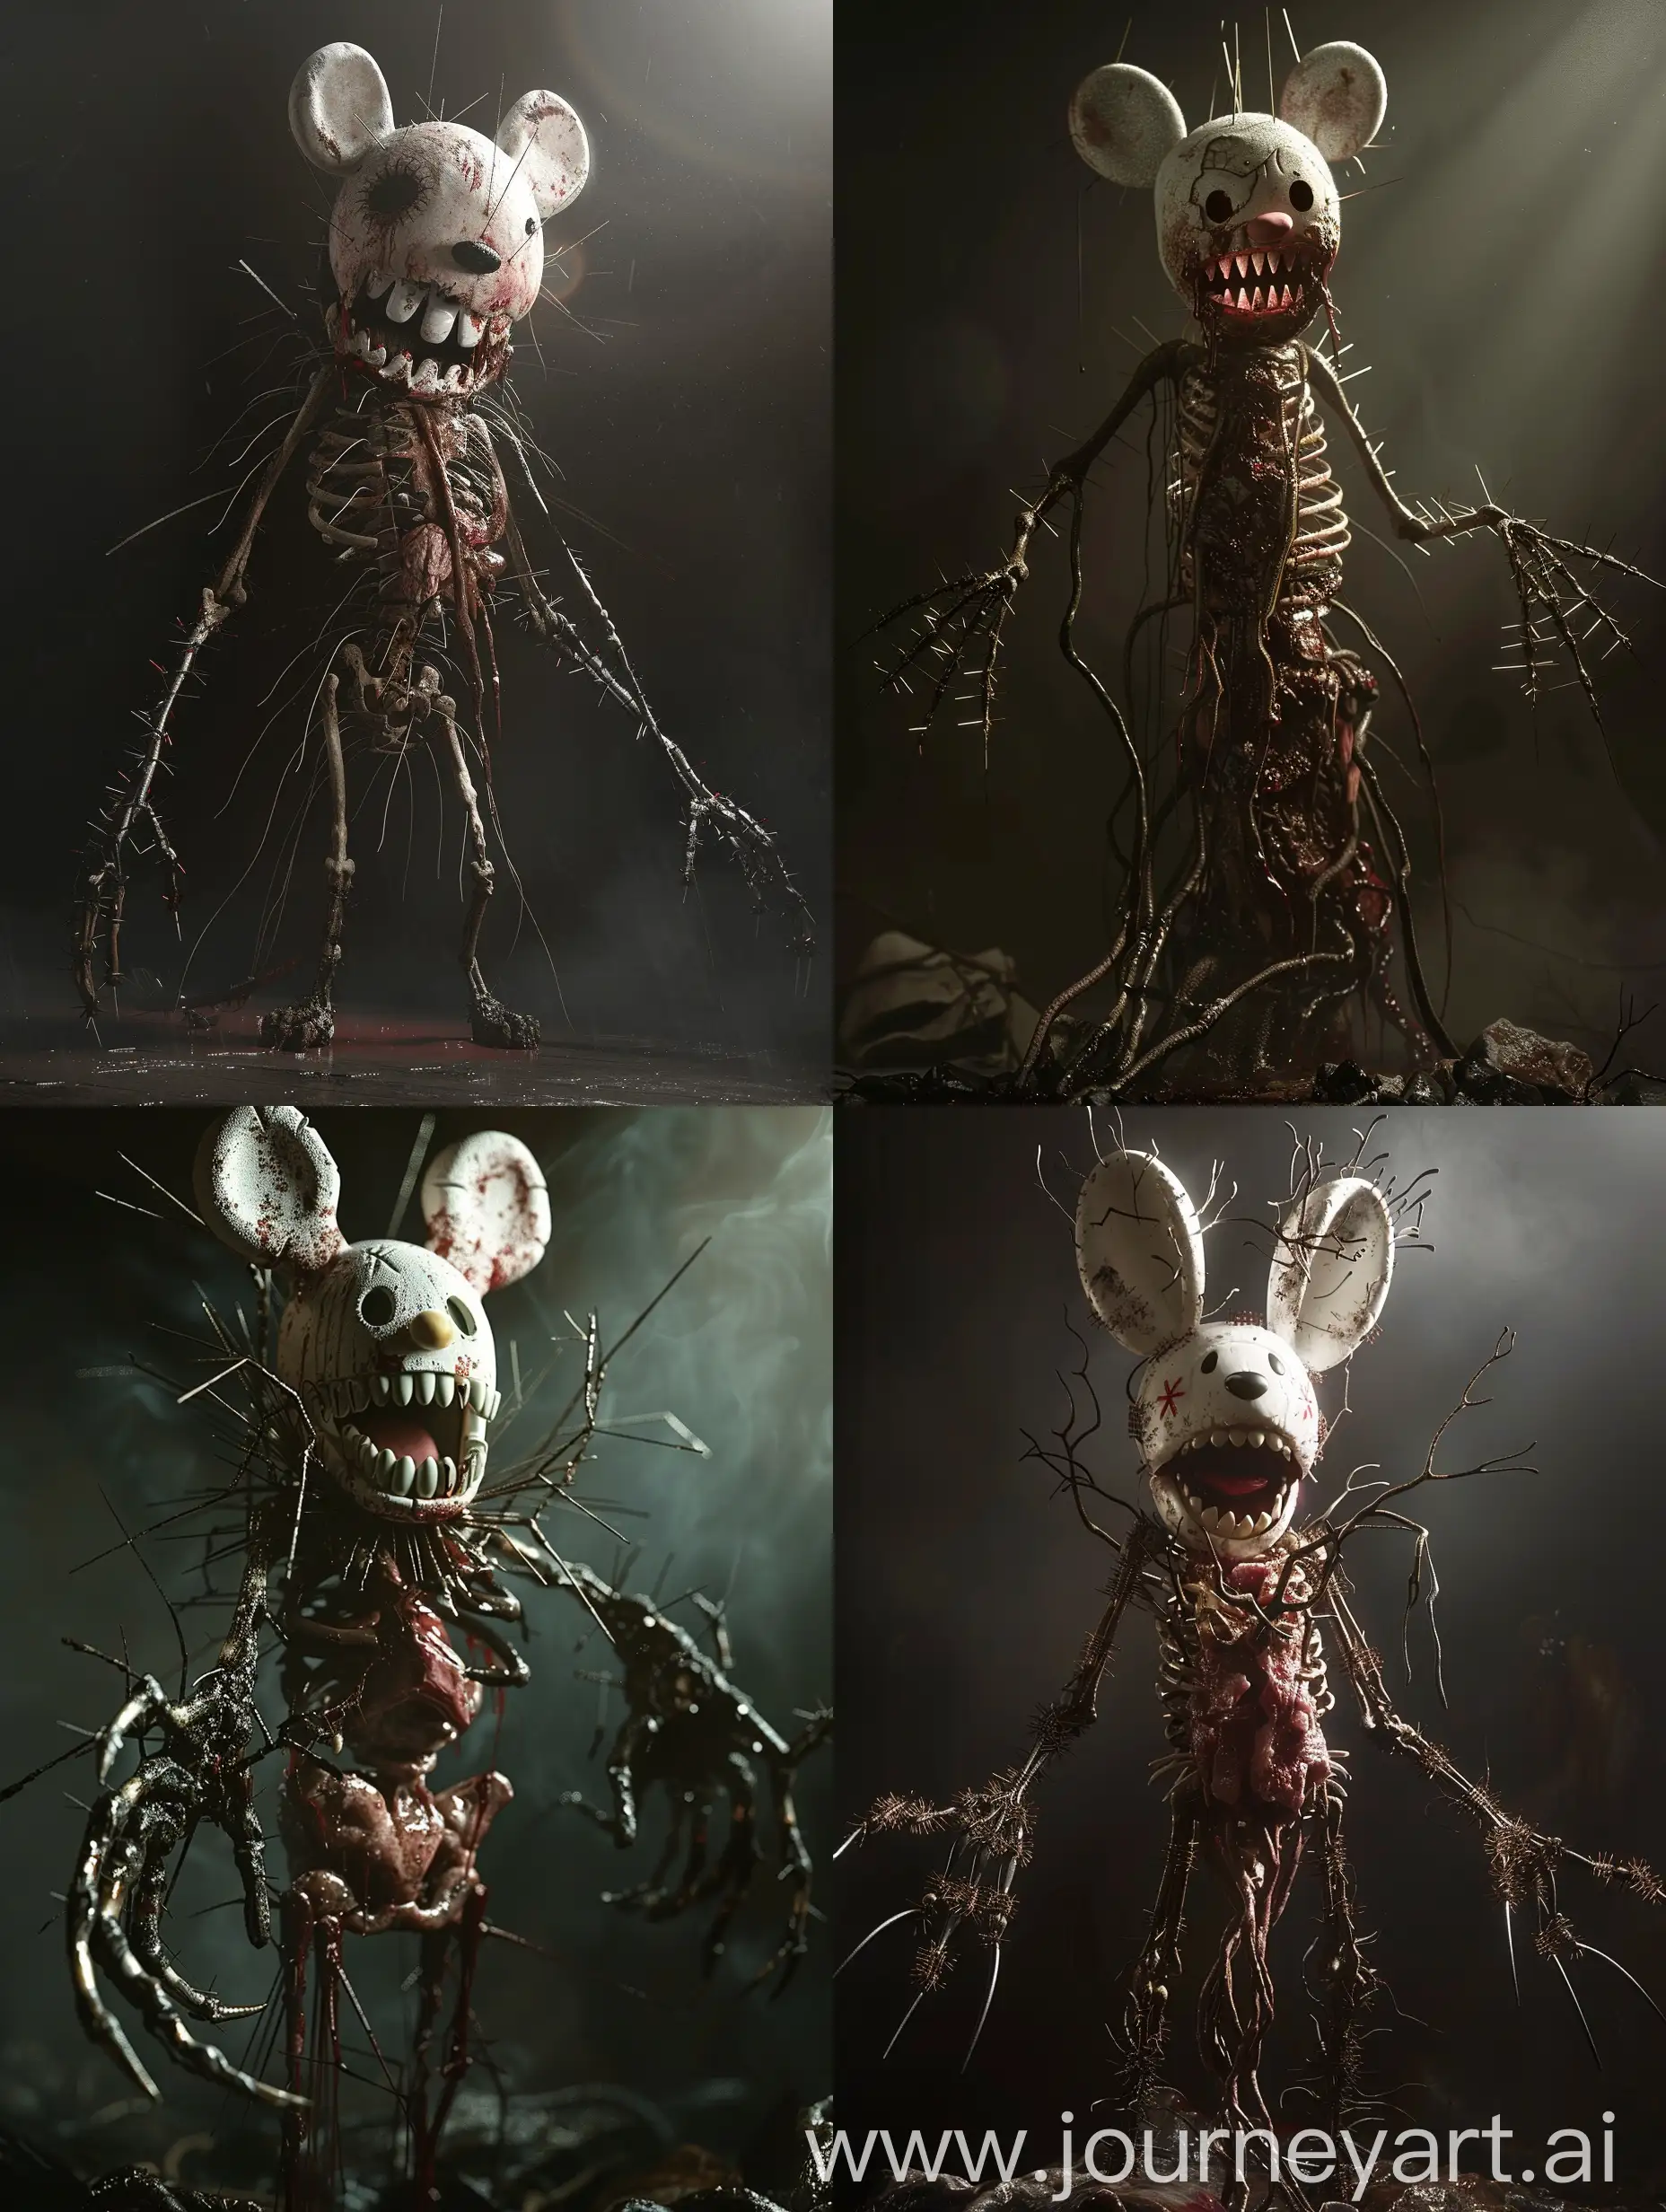  a detructured and unsettling monster wearing a miffy mascot head, the teeth are showing in the middle of a scraggy body made out of meat and broken spines, looking like a tall skeleton, thorn fingers with threatening claws shining in the half lighted scene, dark shadows, in the style of hellraiser, gore